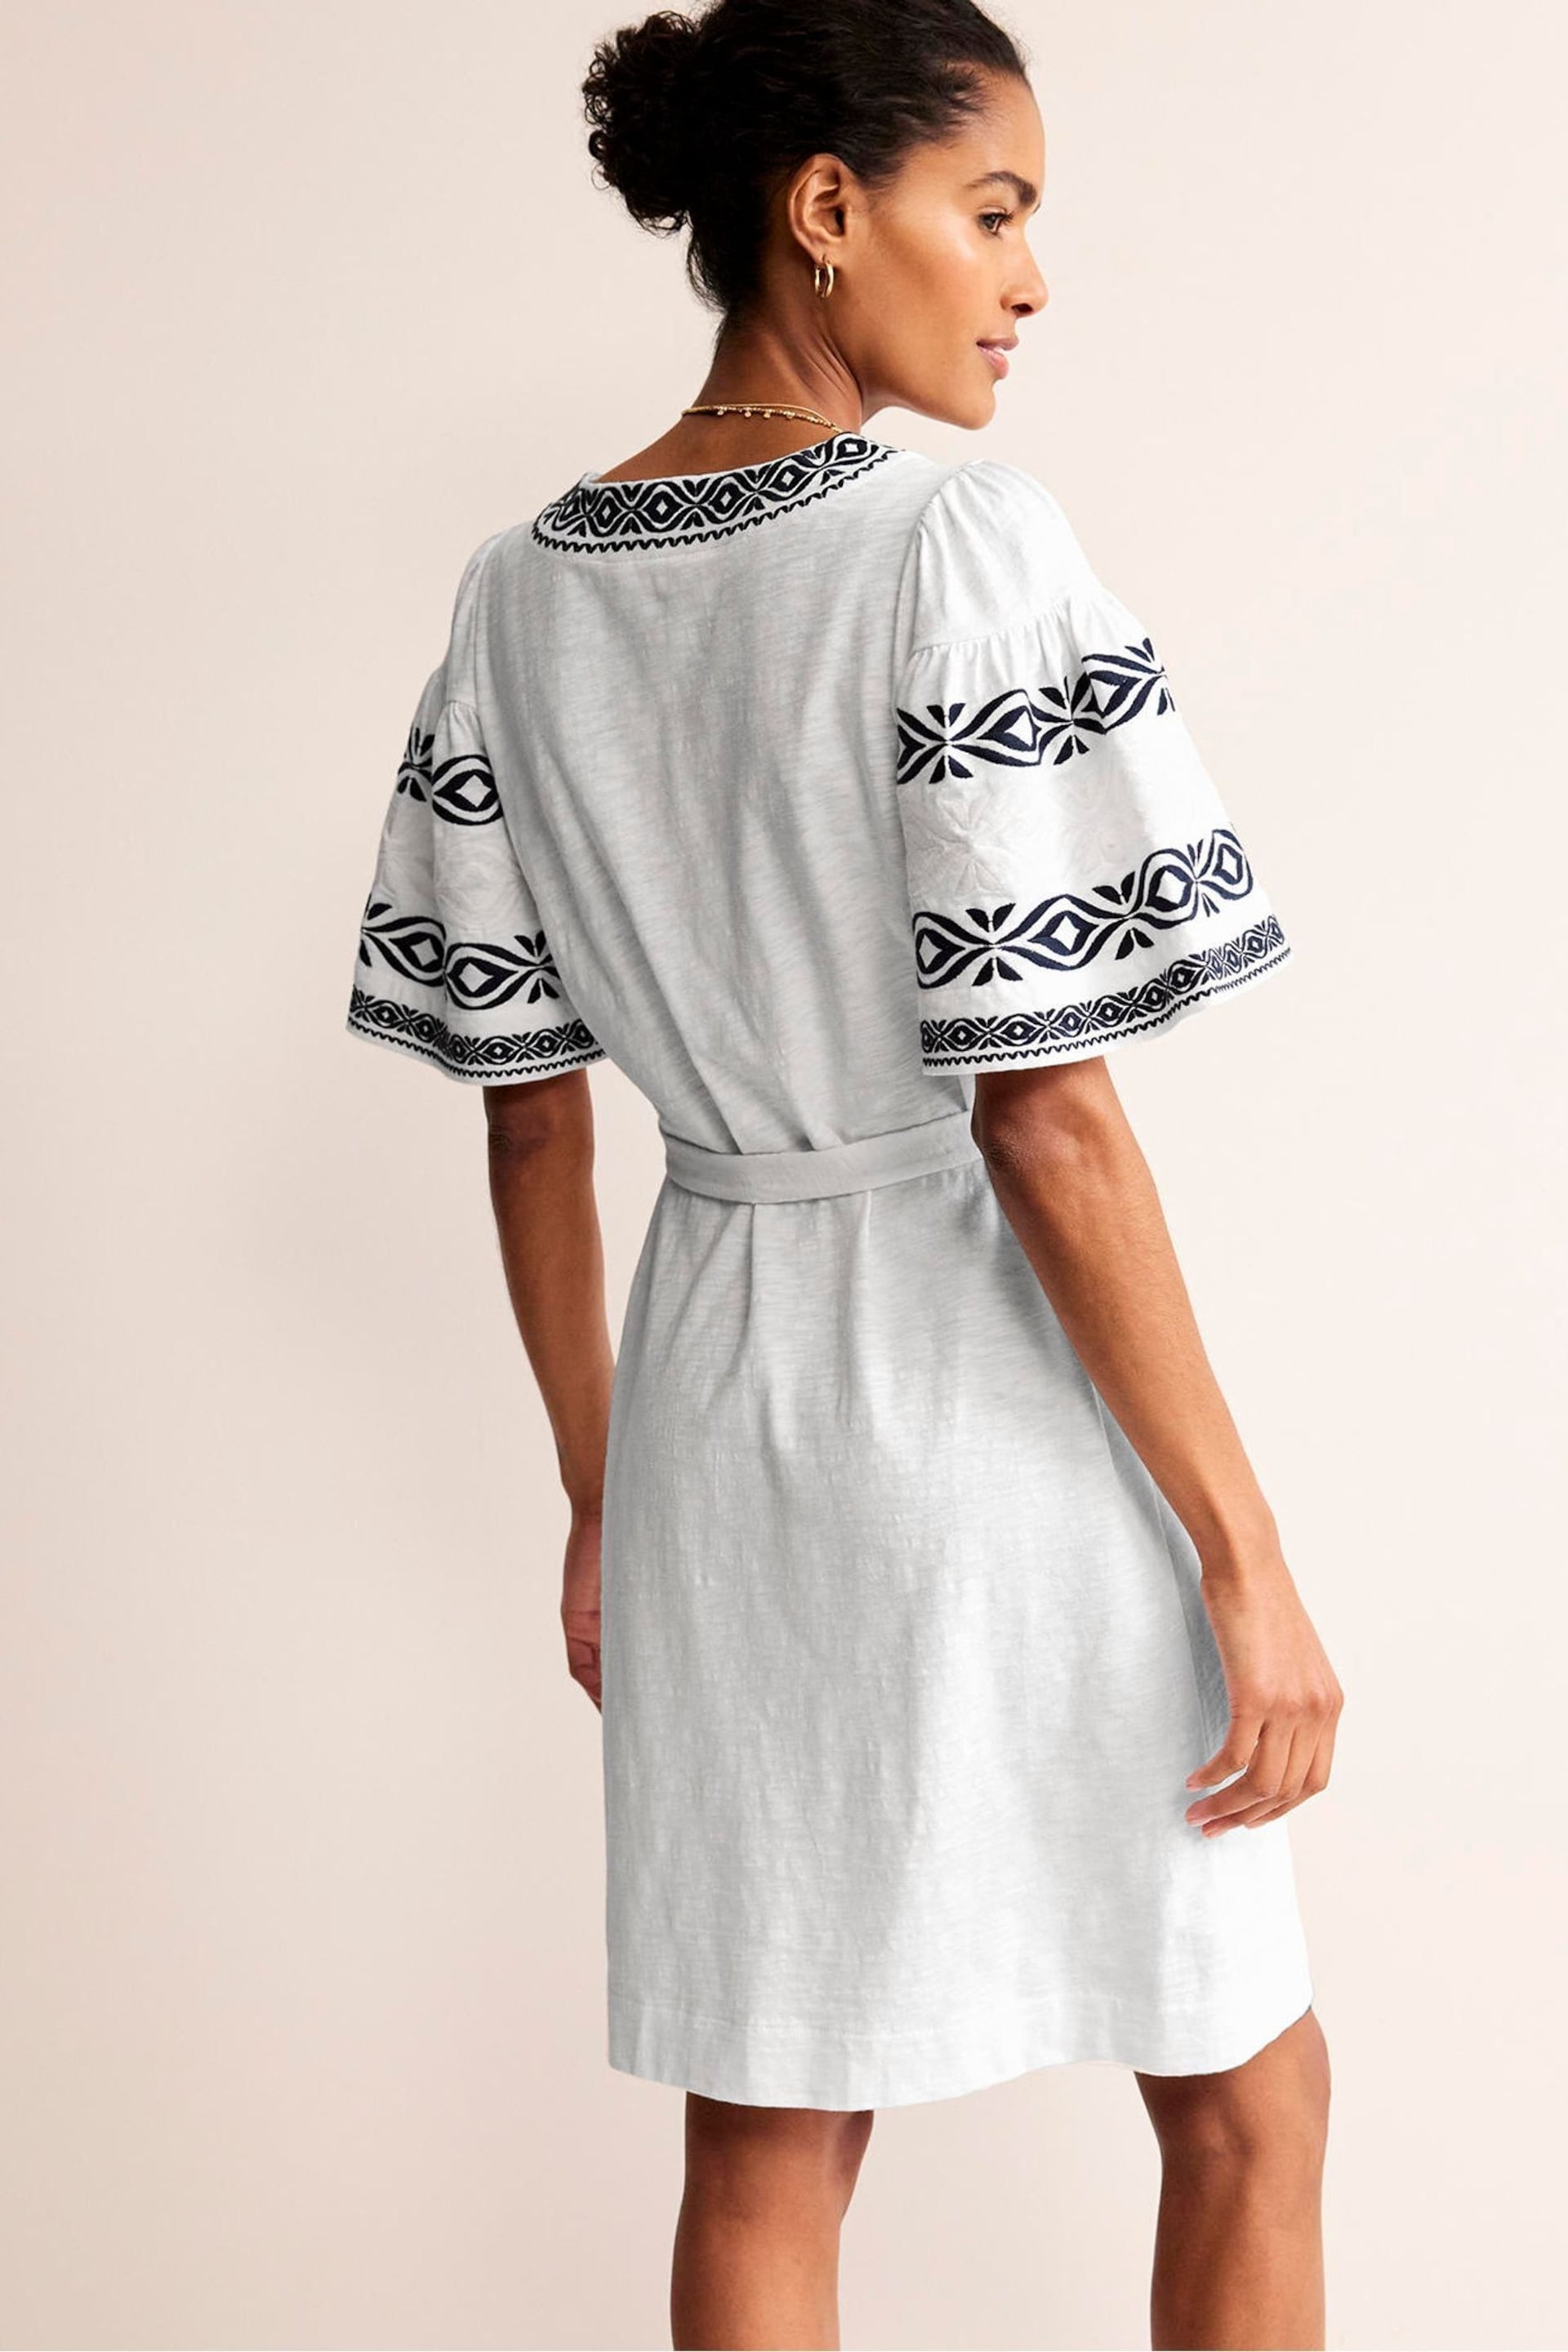 Boden White Embroidered Jersey Short Dress - Image 3 of 5